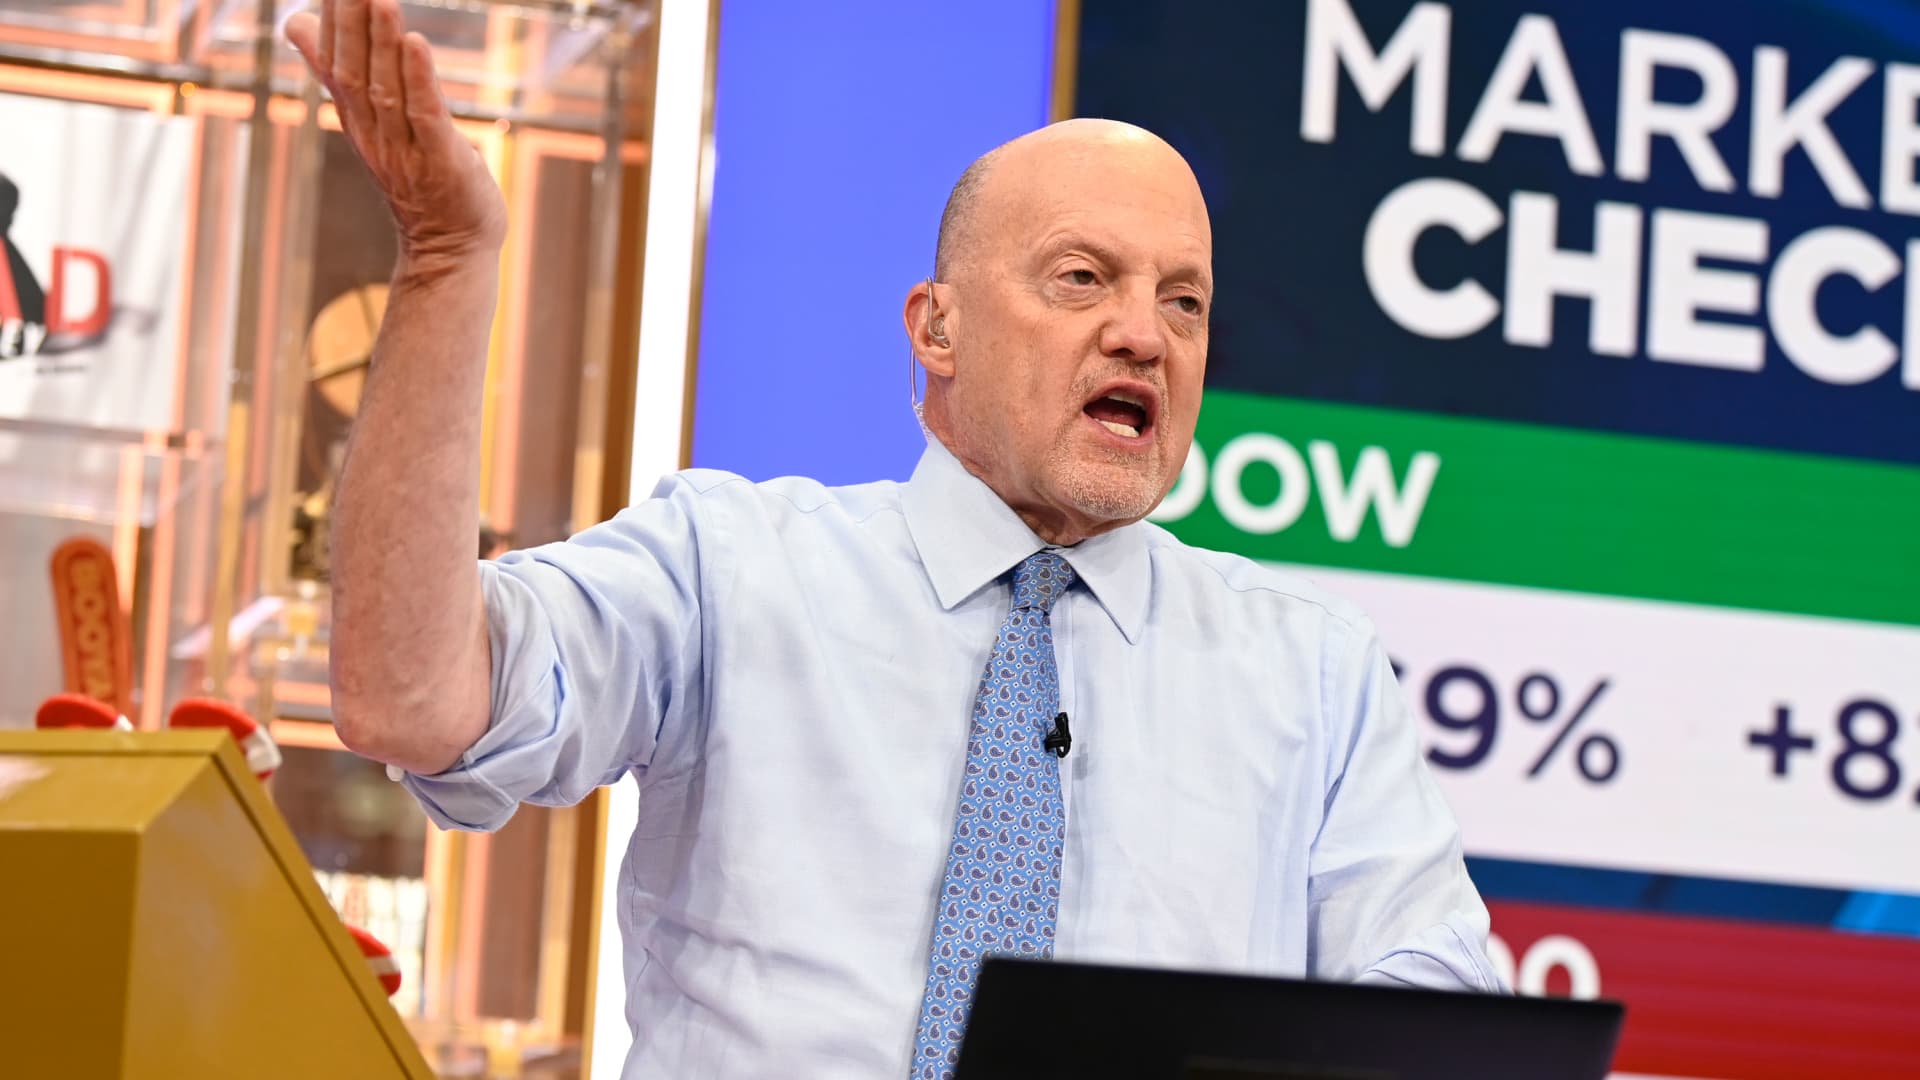 Charts suggest the S&P 500 will rally in December Jim Cramer says – CNBC